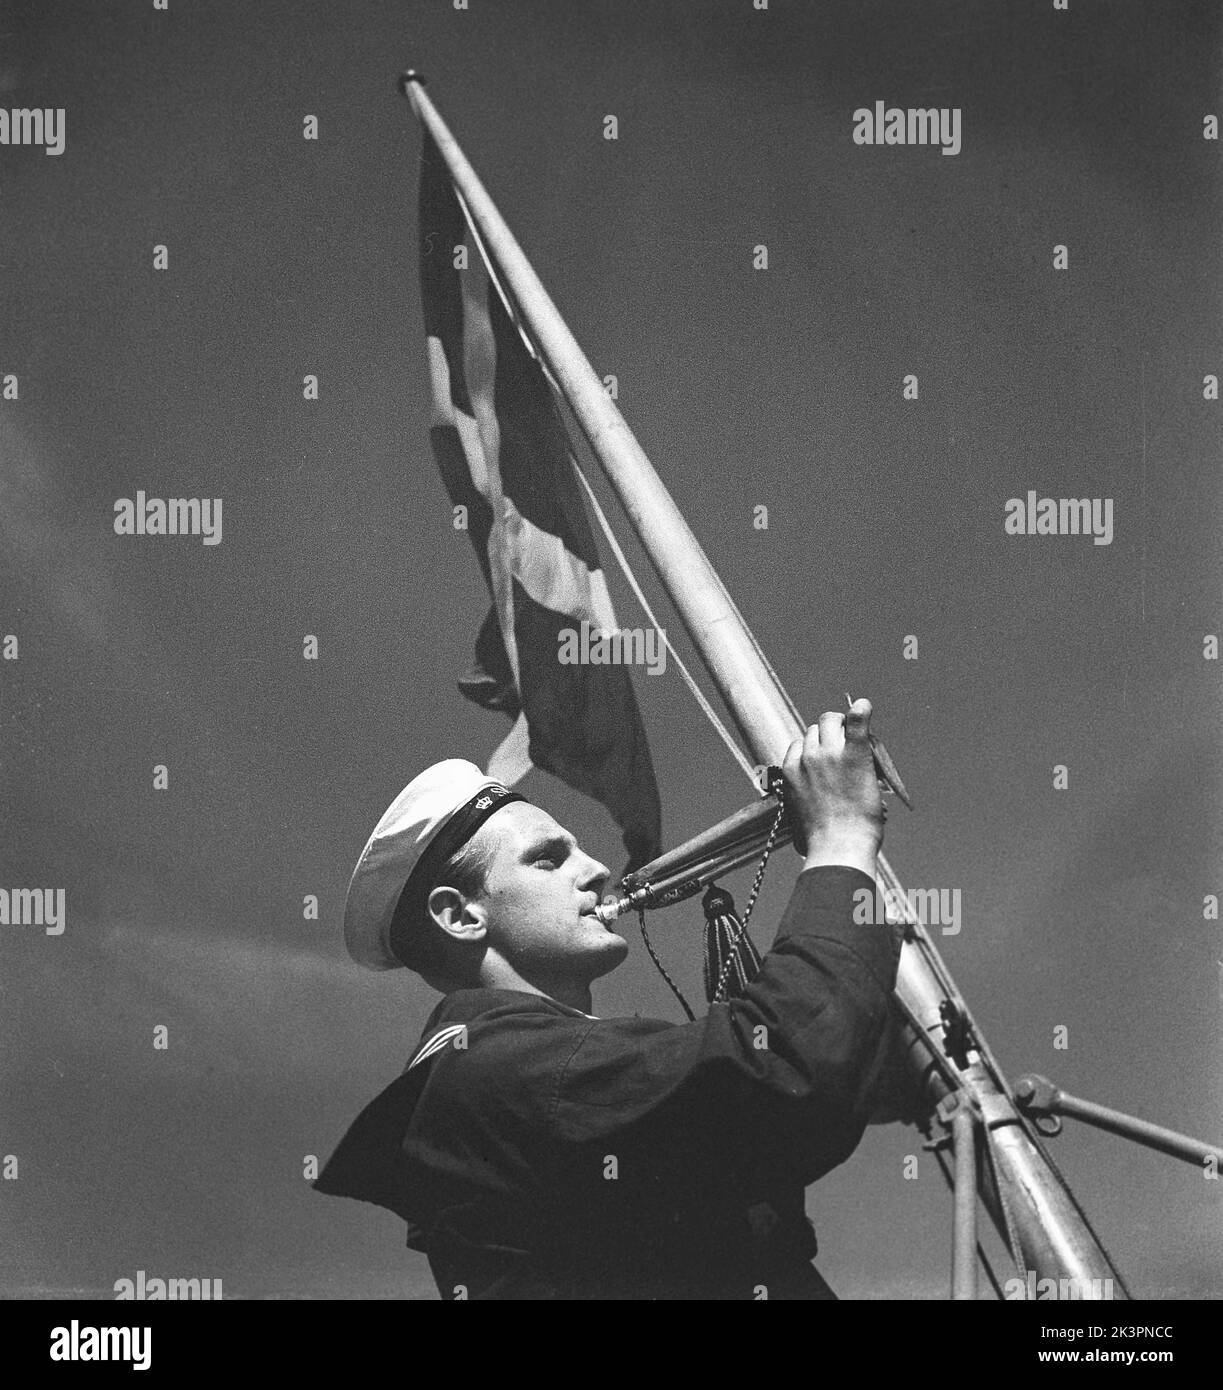 During World war II. The war ship Sverige during navy exercises at sea. Detail of a sailor signalling in his brass horn. Sweden june 1940. Kristoffersson ref 141 Stock Photo